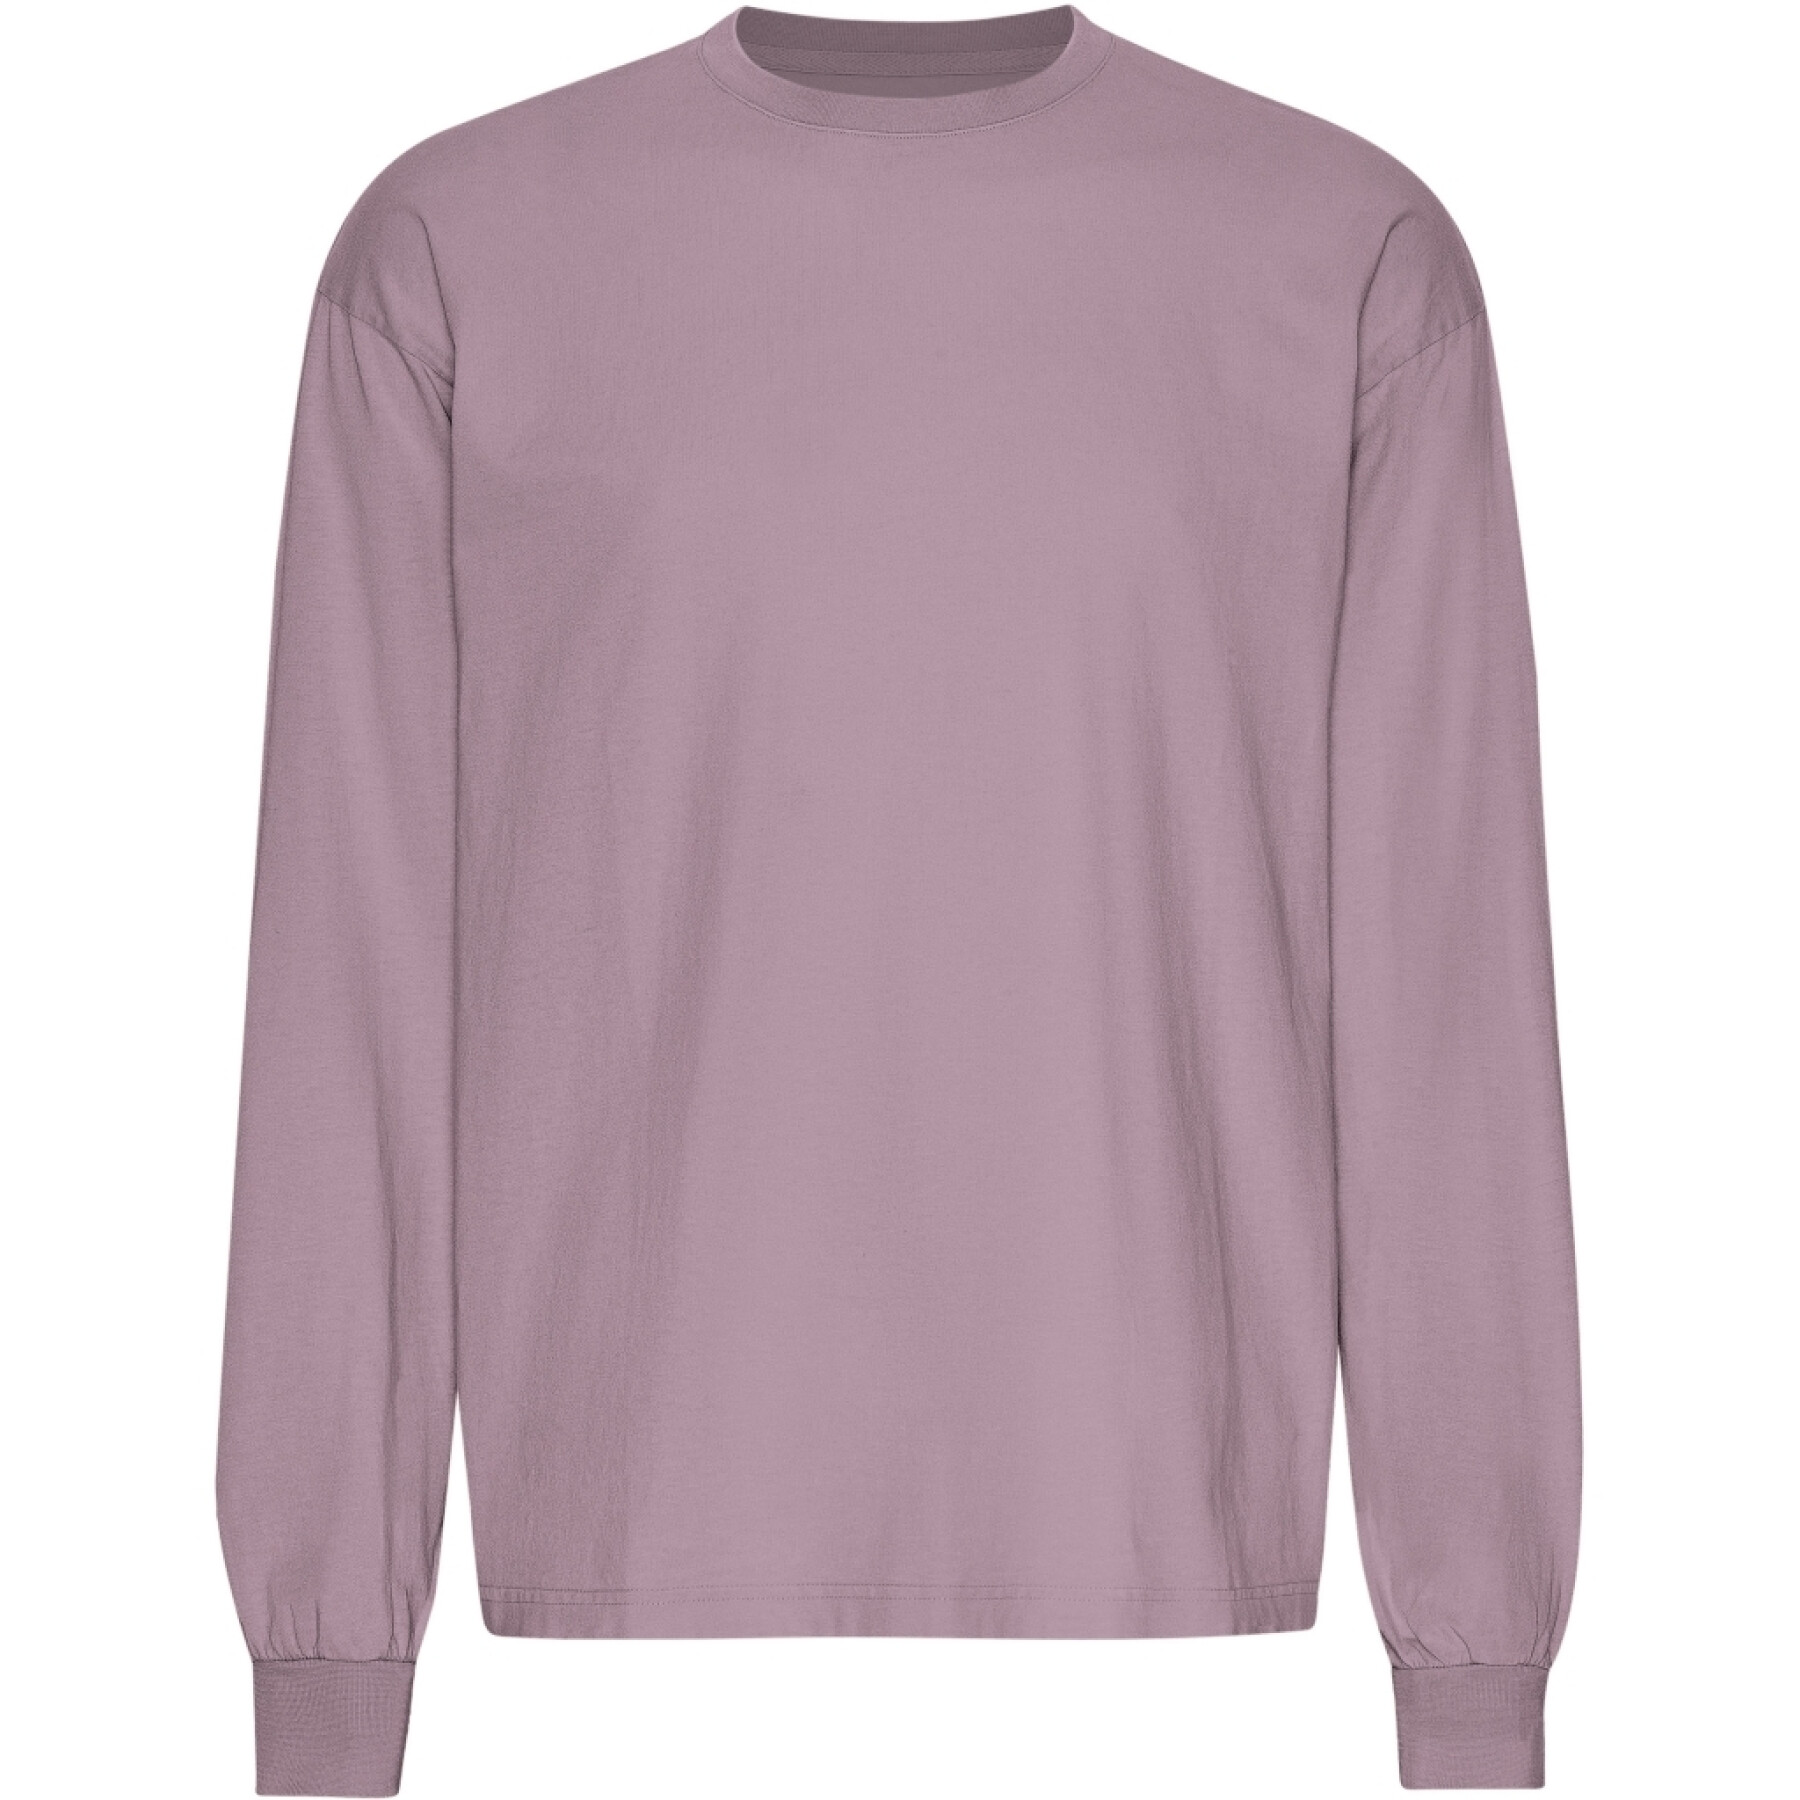 Oversized long-sleeve T-shirt Colorful Standard Organic Pearly Purple